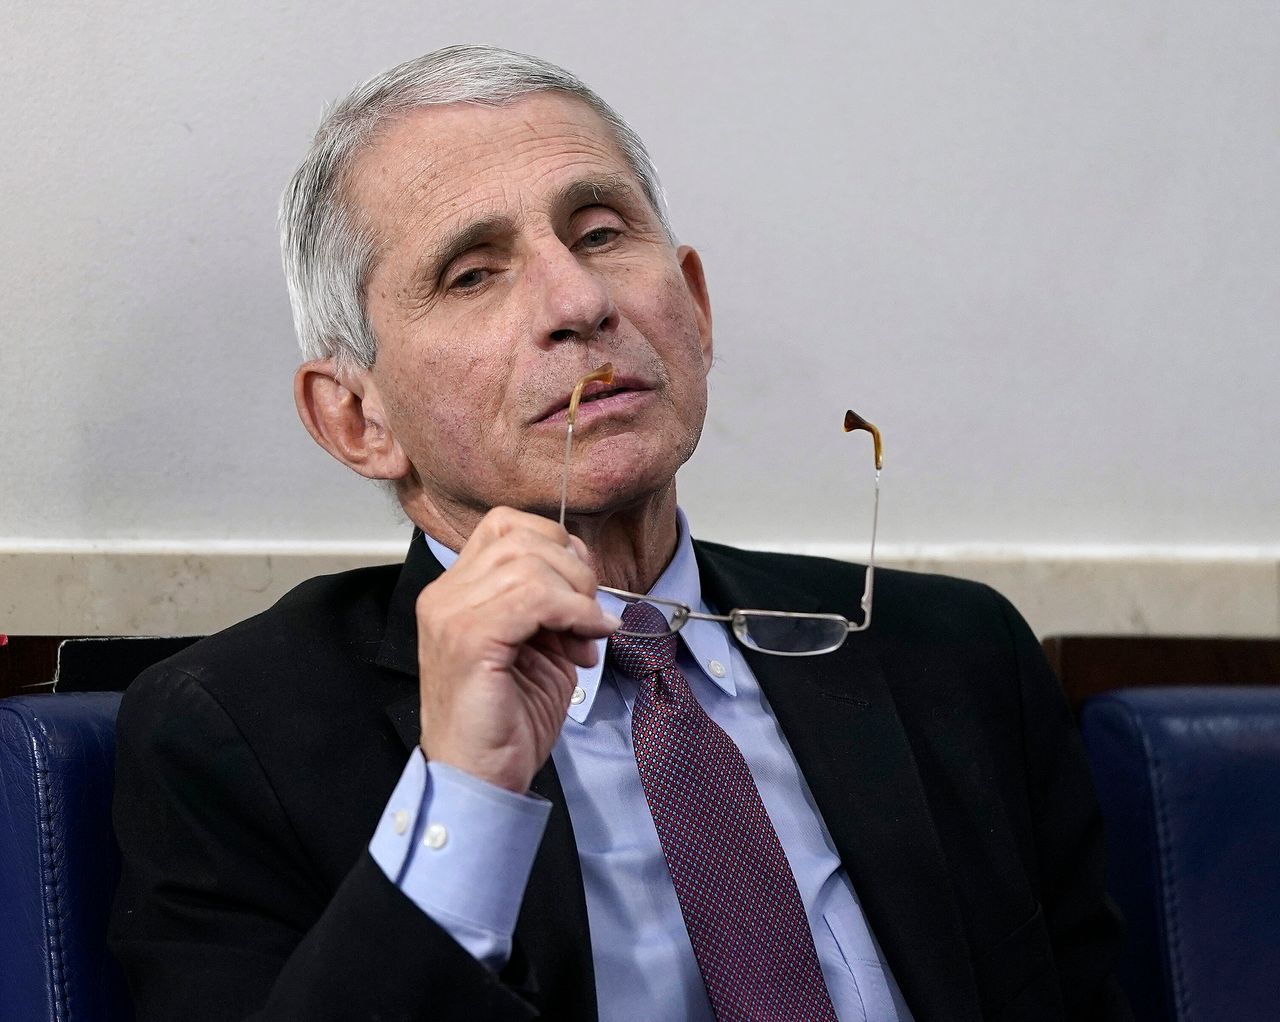 Top US health official Dr Anthony Fauci has self-isolated after coming into contact with confirmed cases of the virus. 